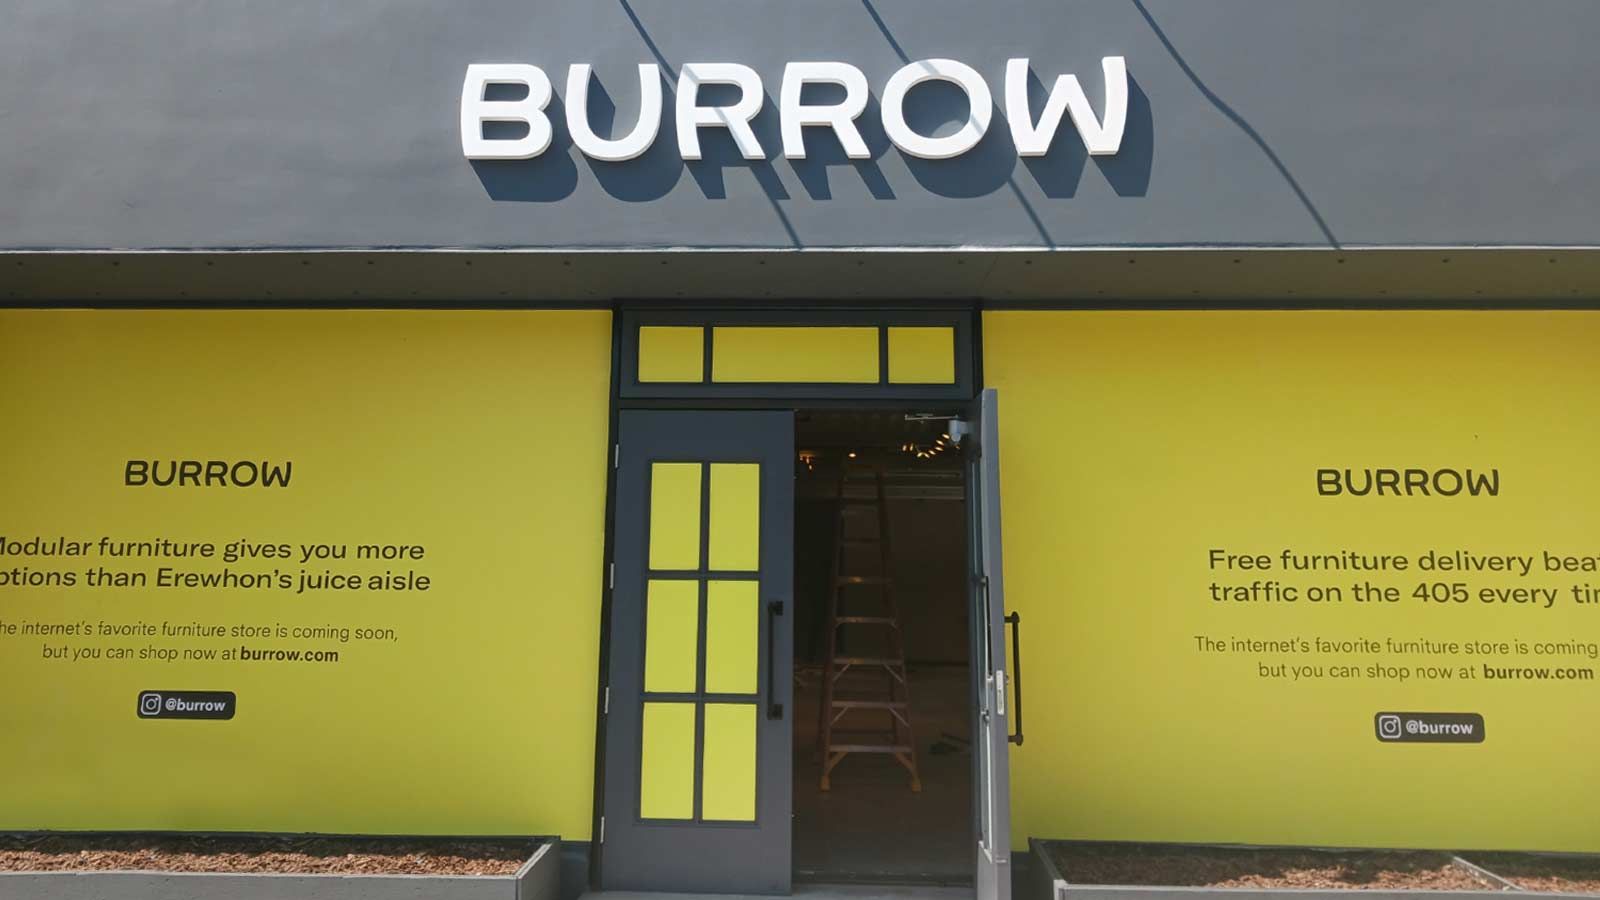 Burrow foam core sign decorating the building top